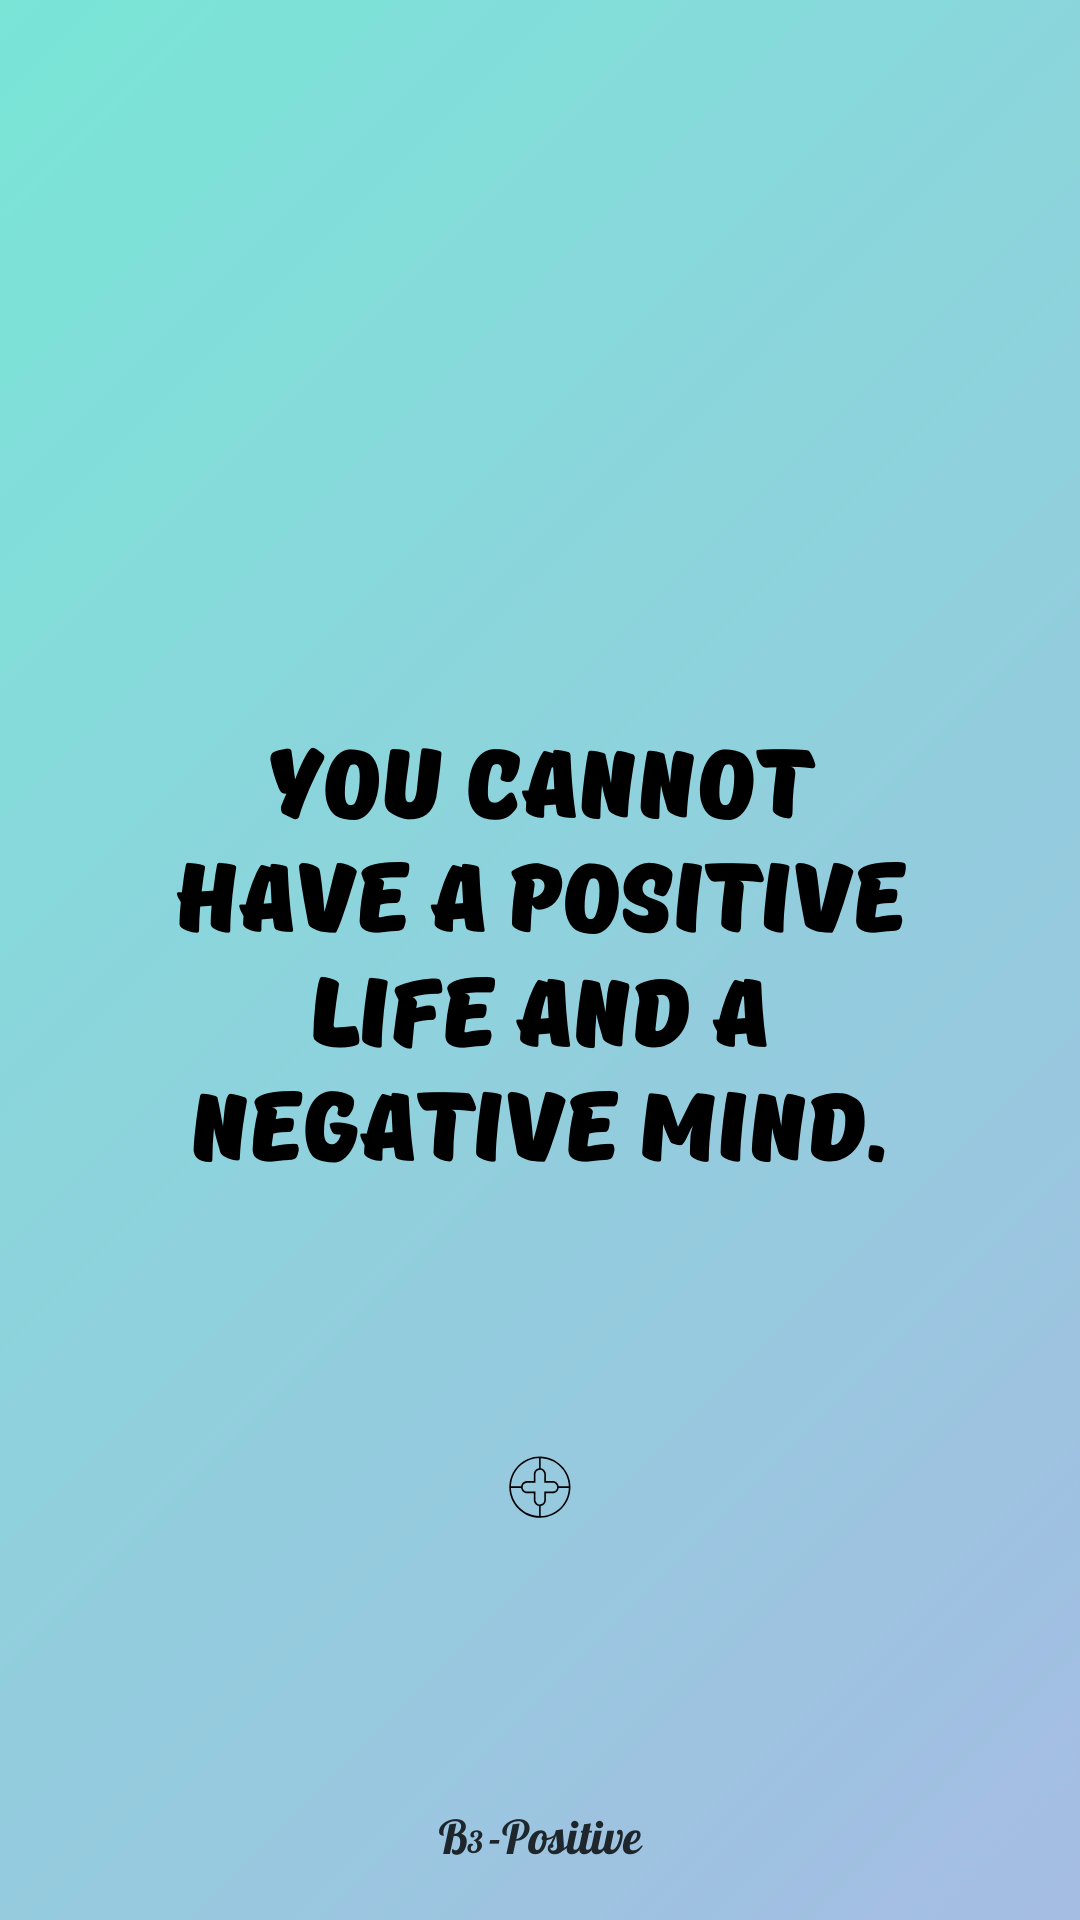 Positivity Quotes Wallpaper Background 2020